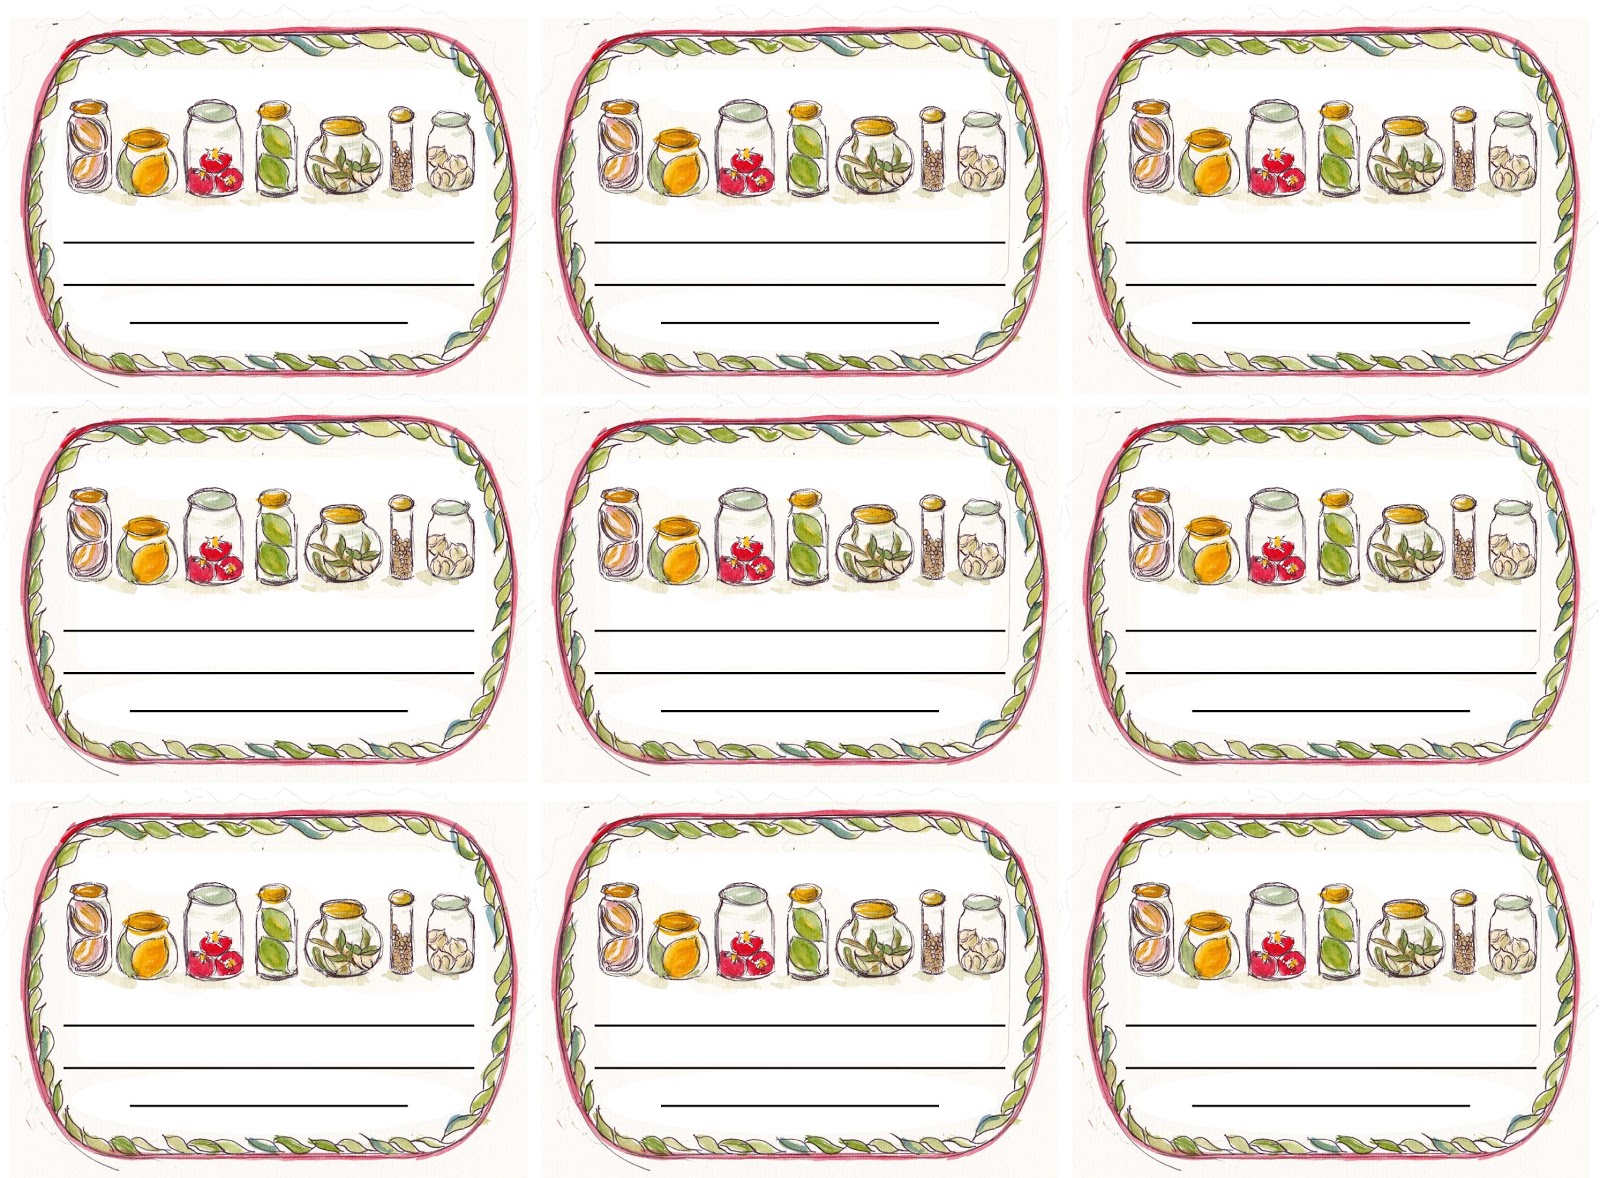 23 Design Your Own Labels Free Images - Make Your Own Labels Free Throughout Chutney Label Templates